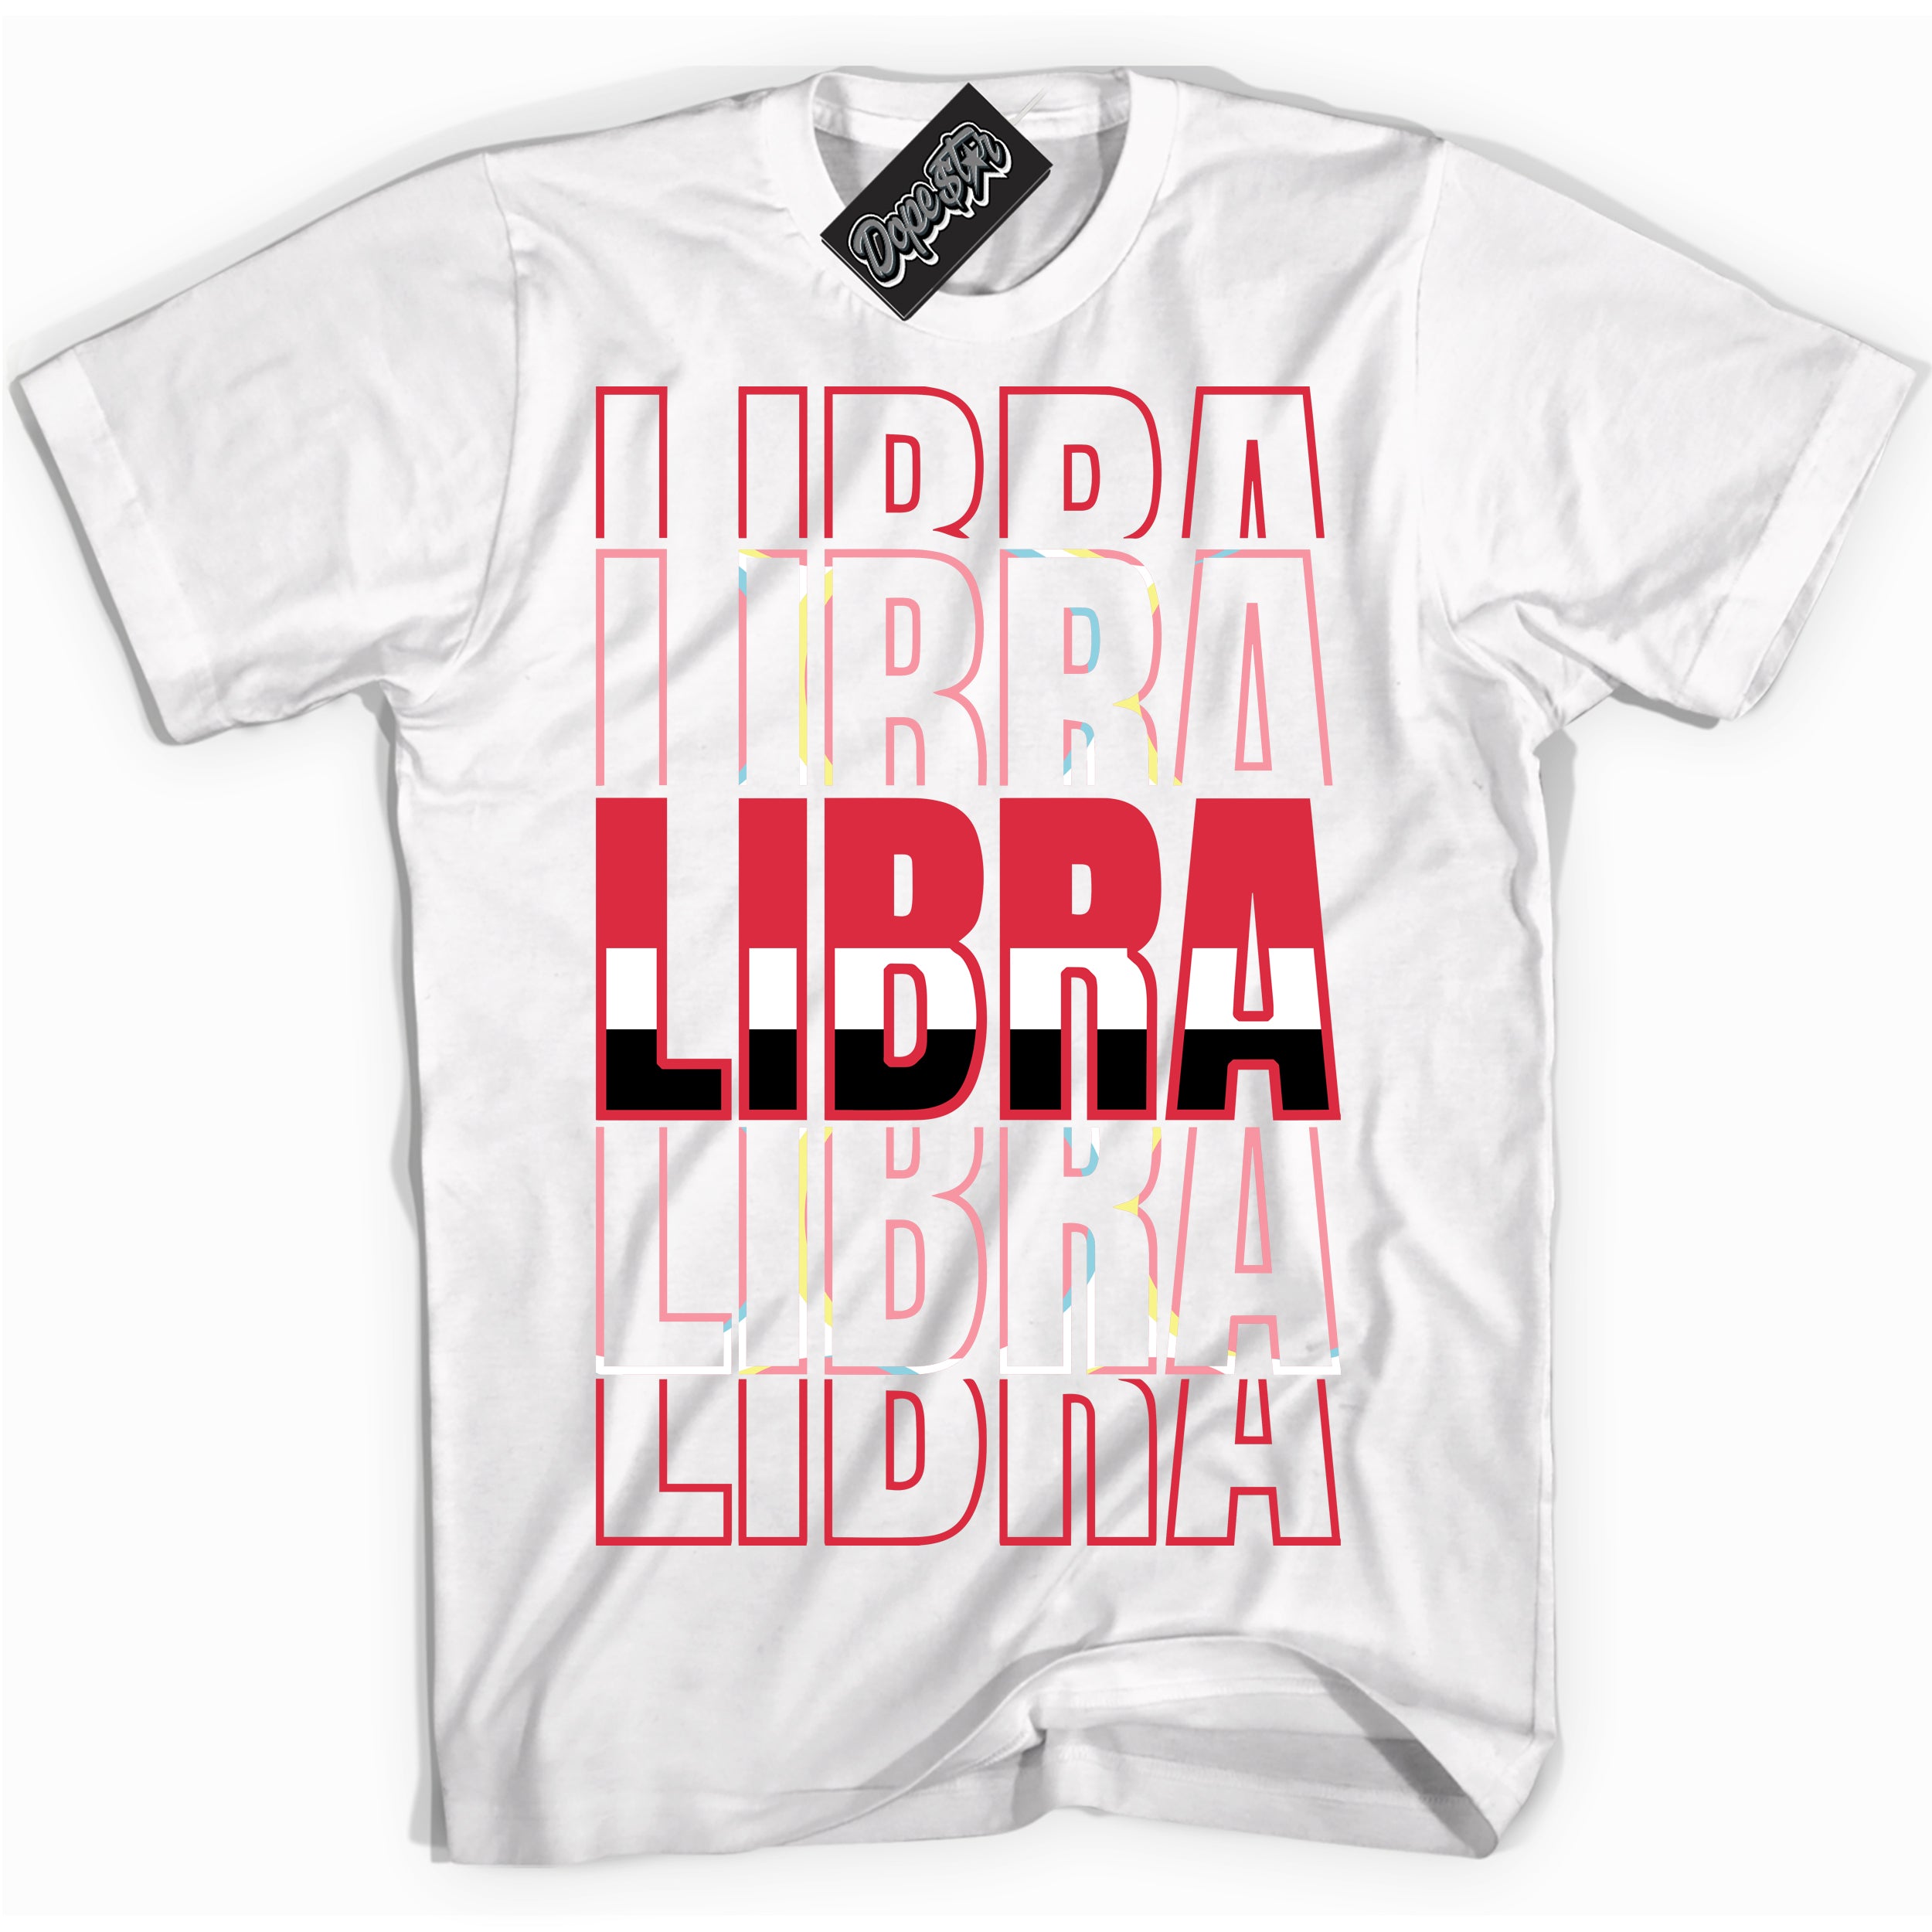 Cool White graphic tee with “ Libra ” design, that perfectly matches Spider-Verse 1s sneakers 